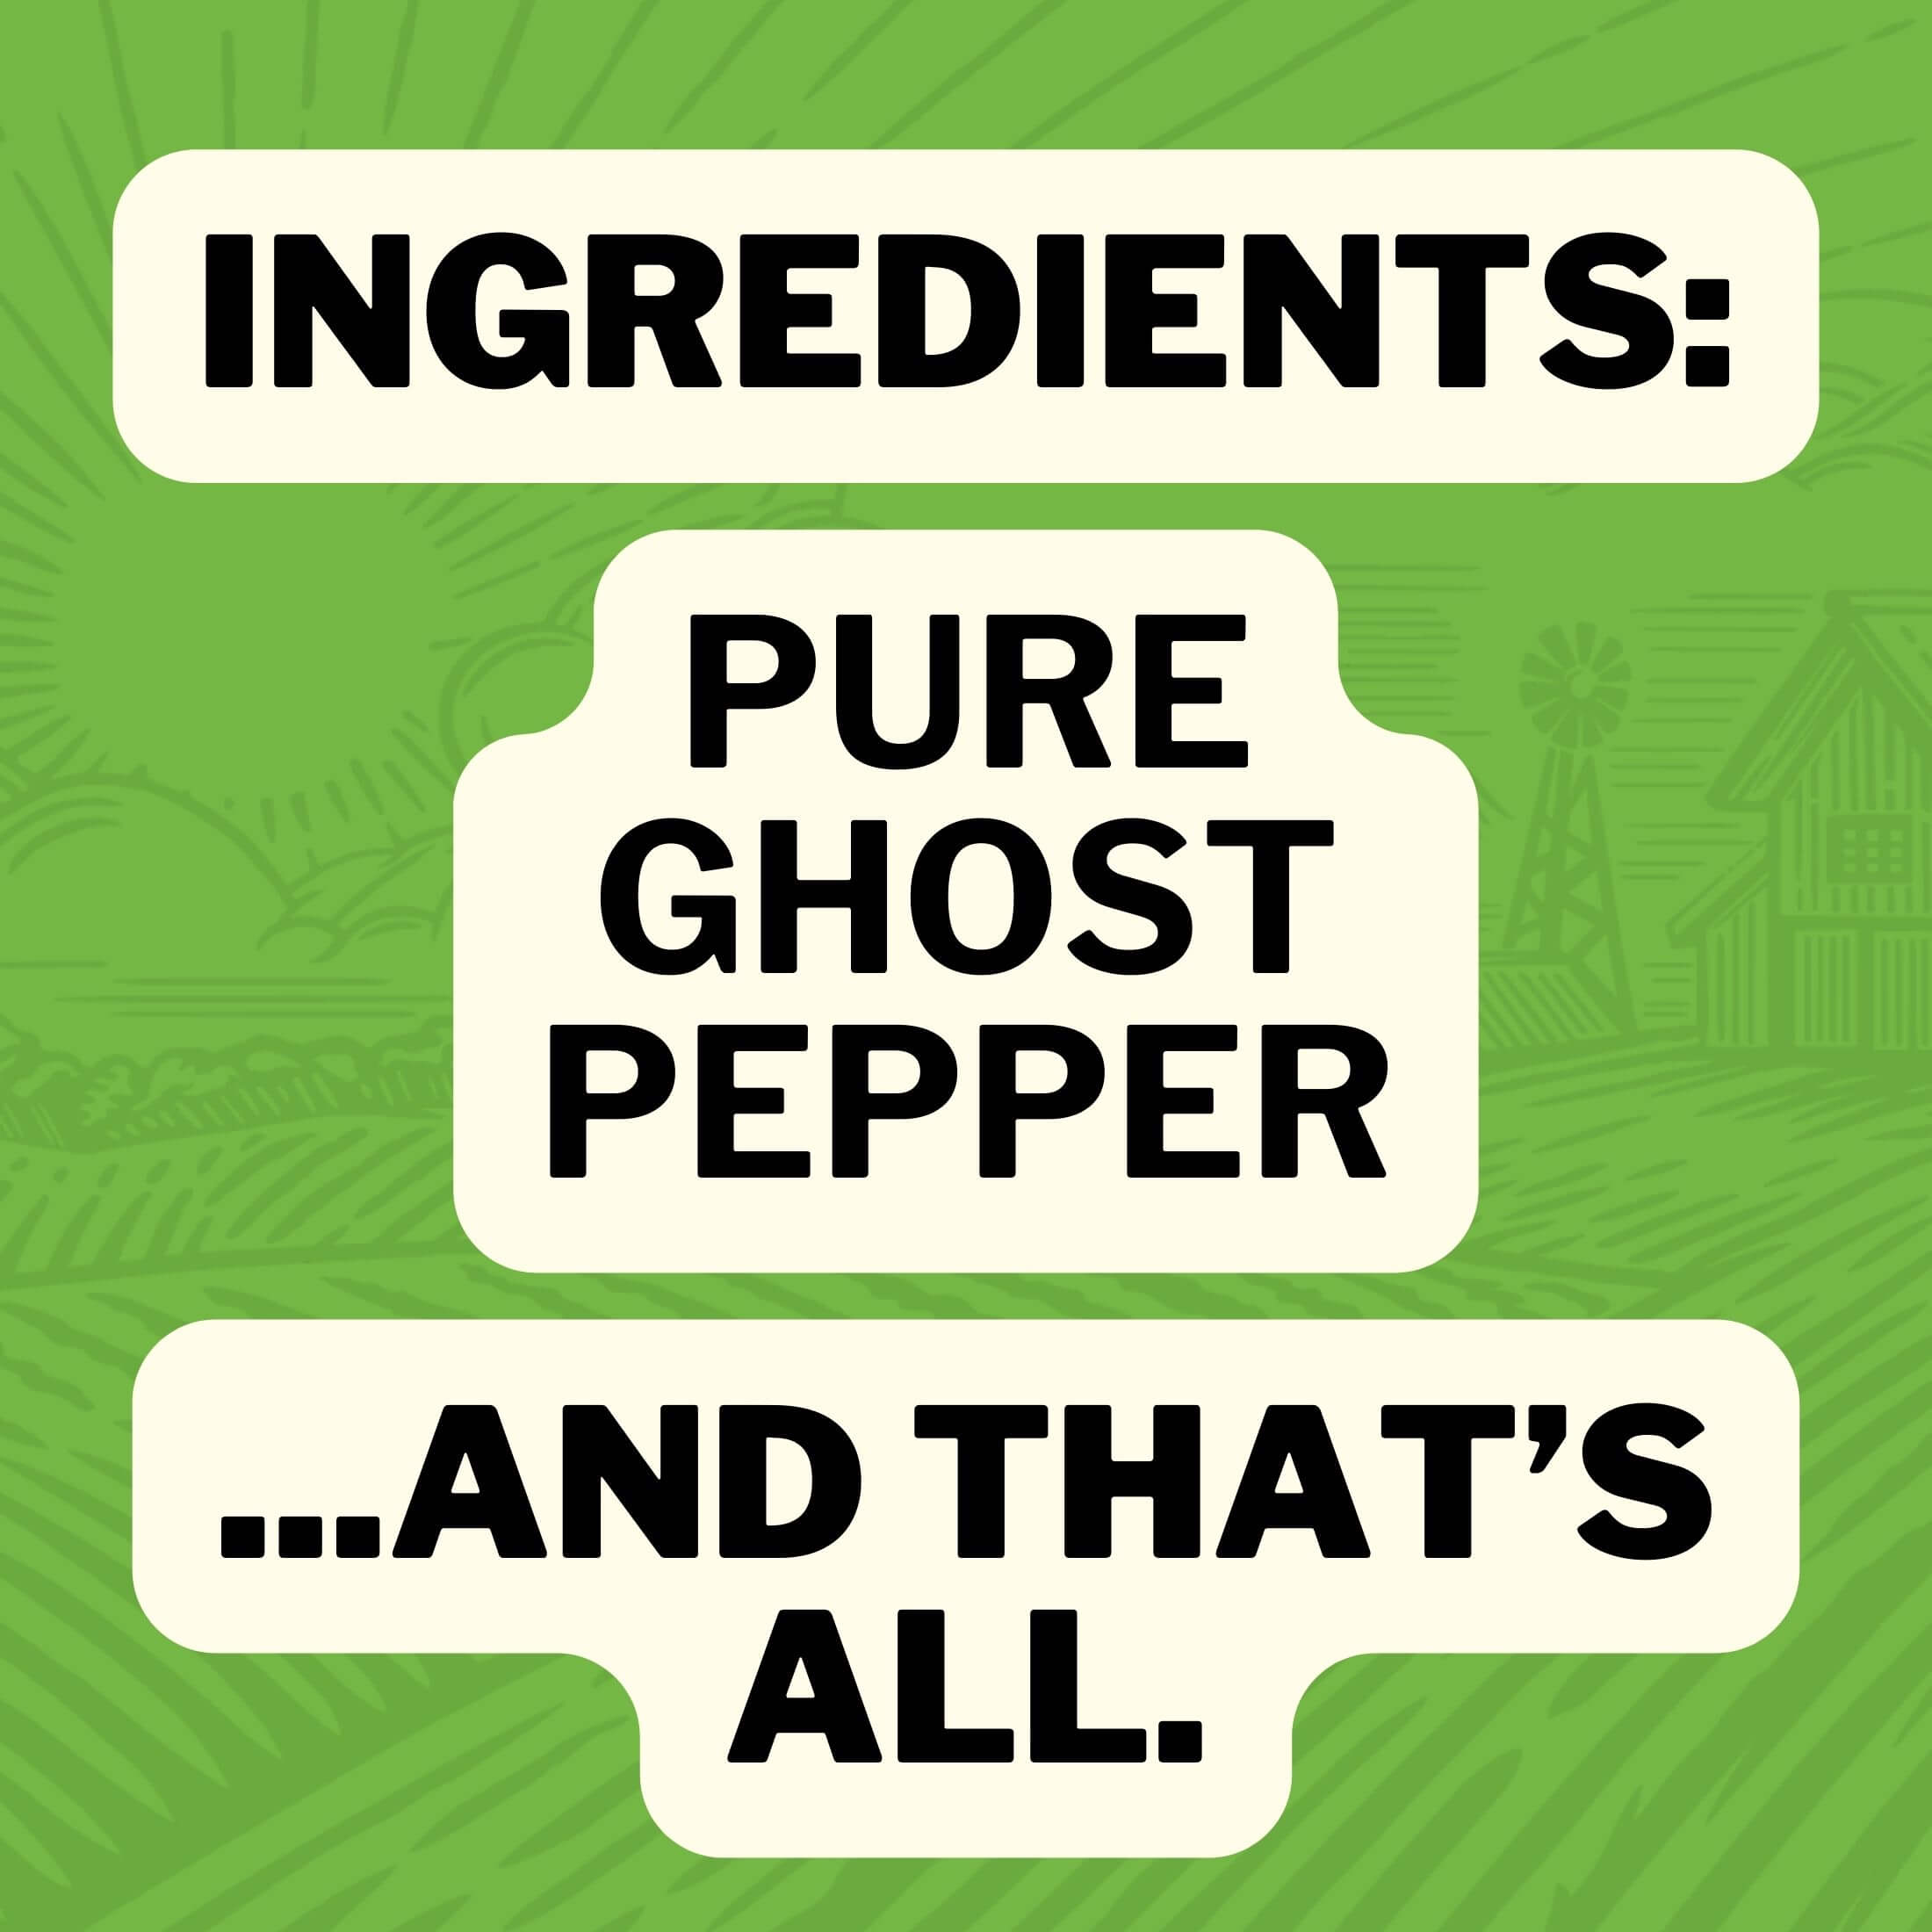 Ingredients: Pire Ghost Pepper Powder... and that's all.